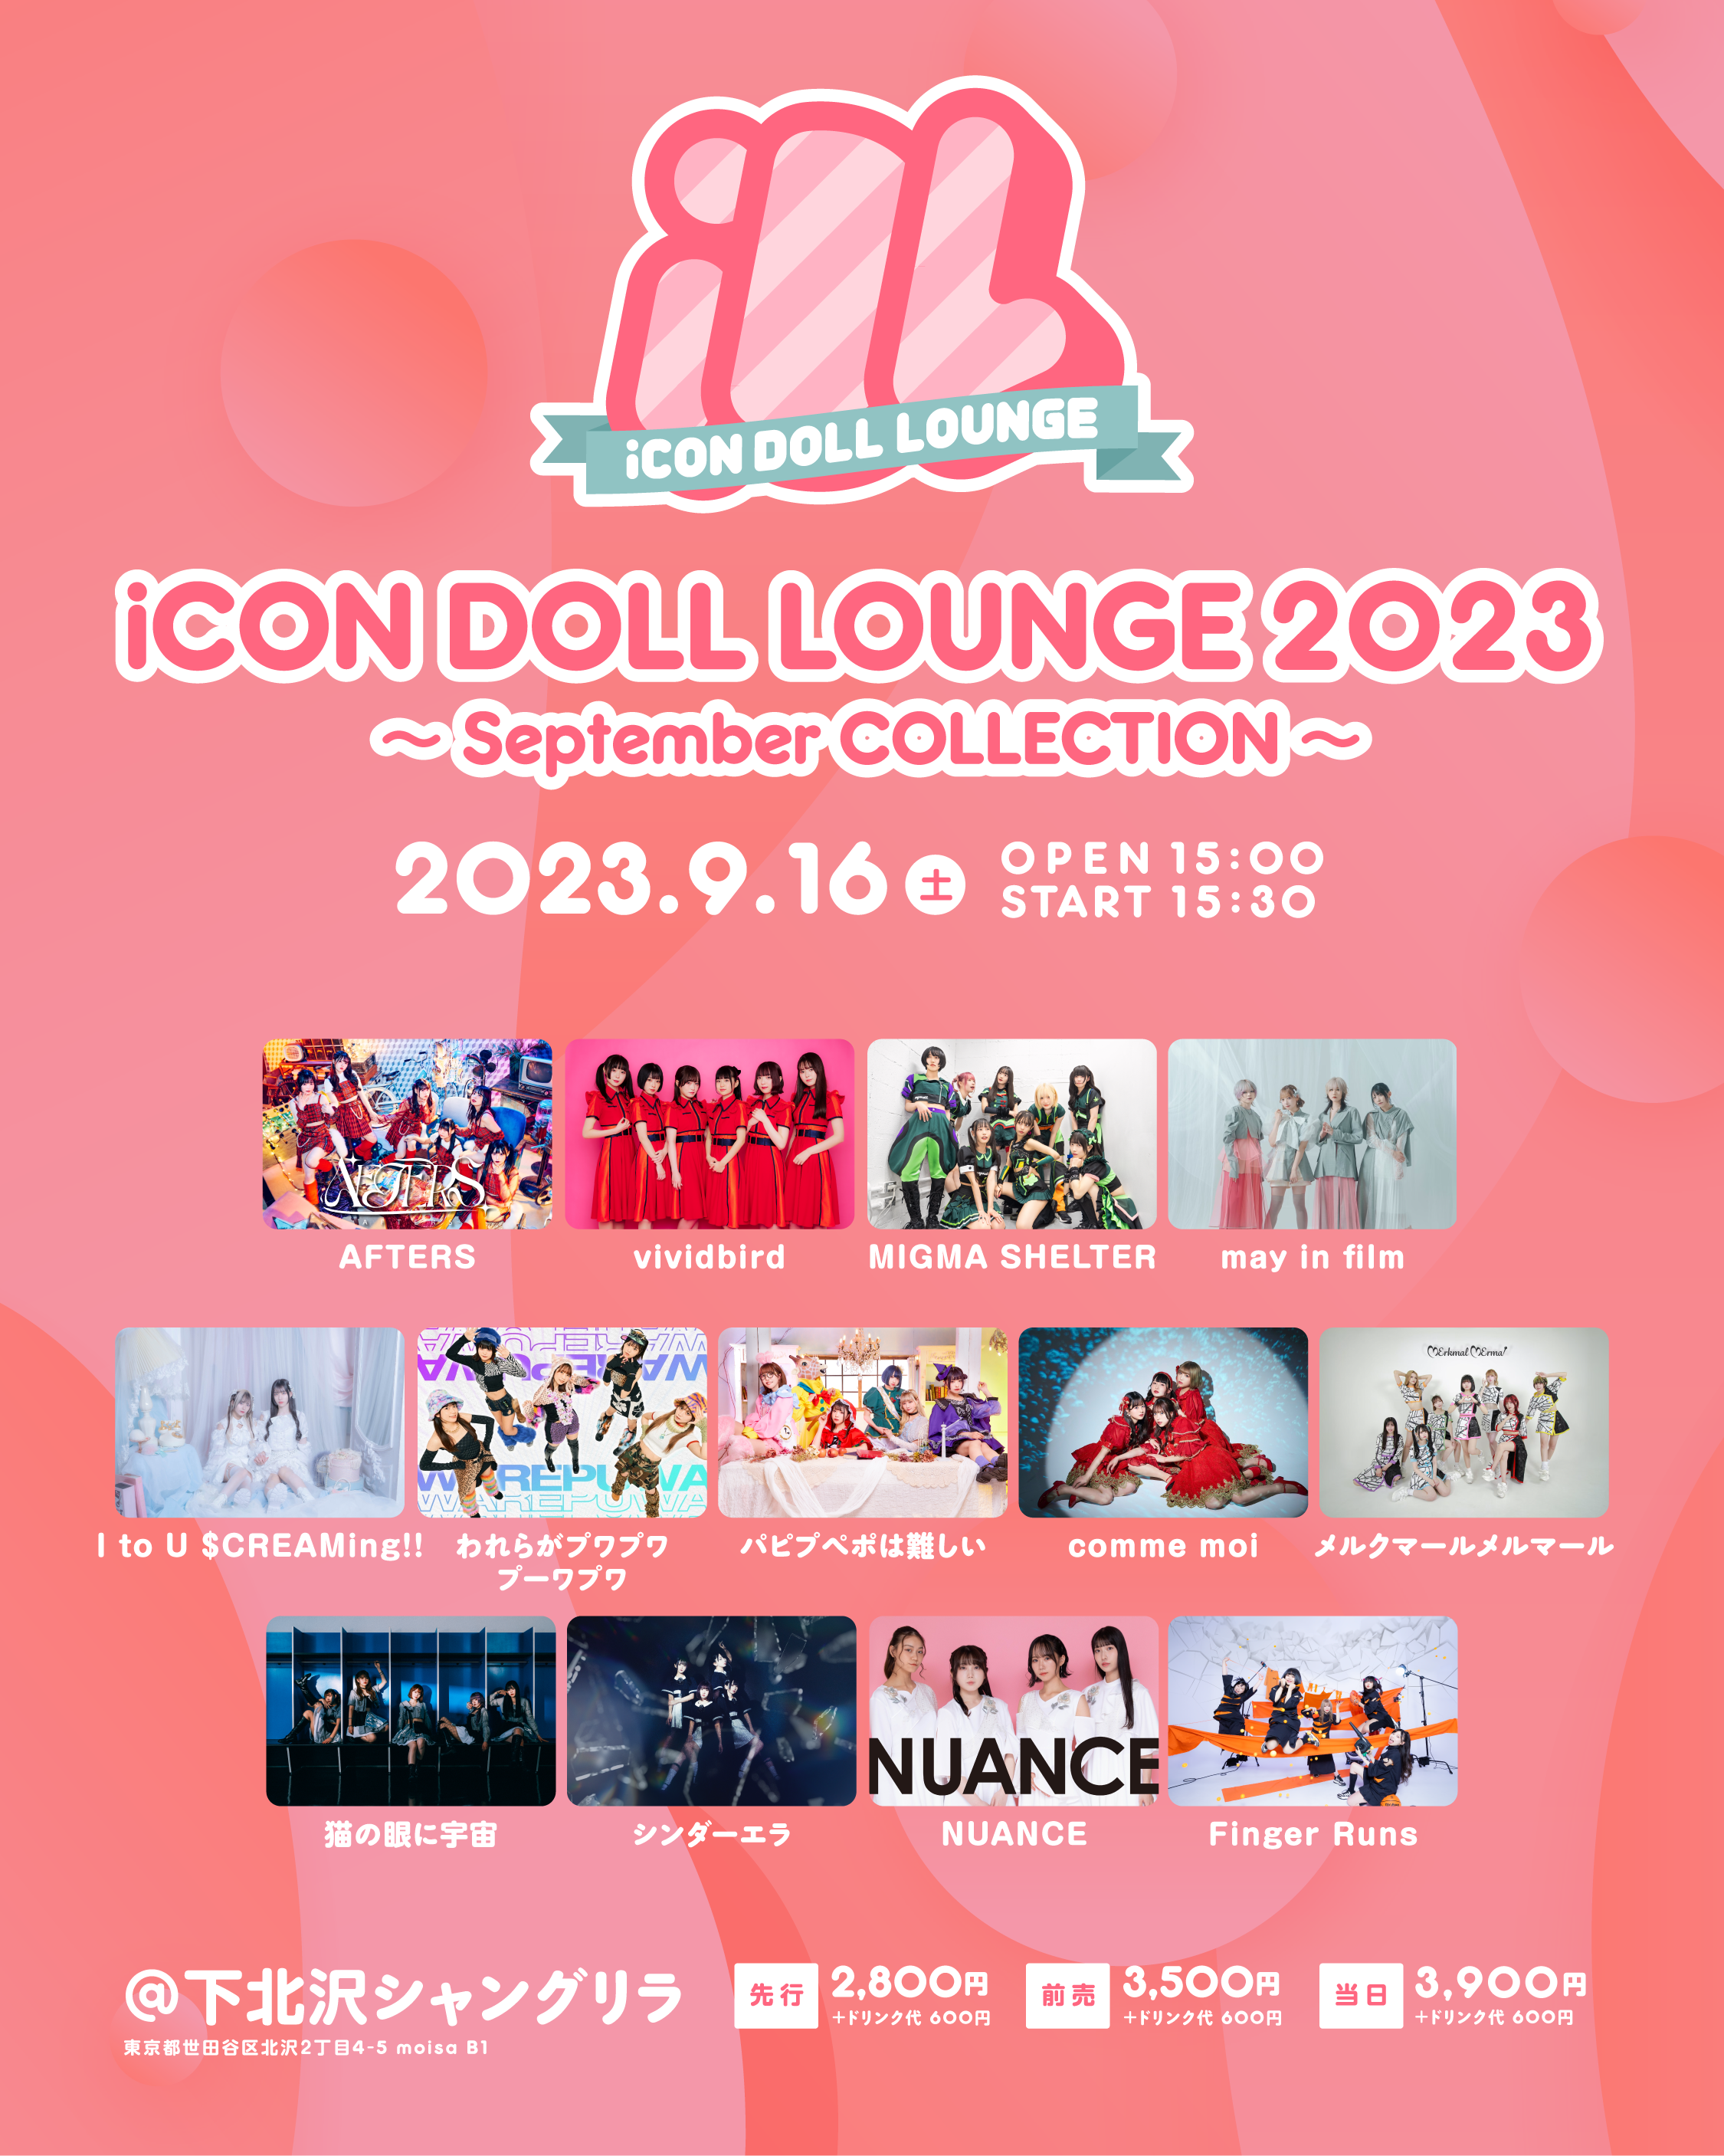 『iCON DOLL LOUNGE 2023』〜 September COLLECTION 〜